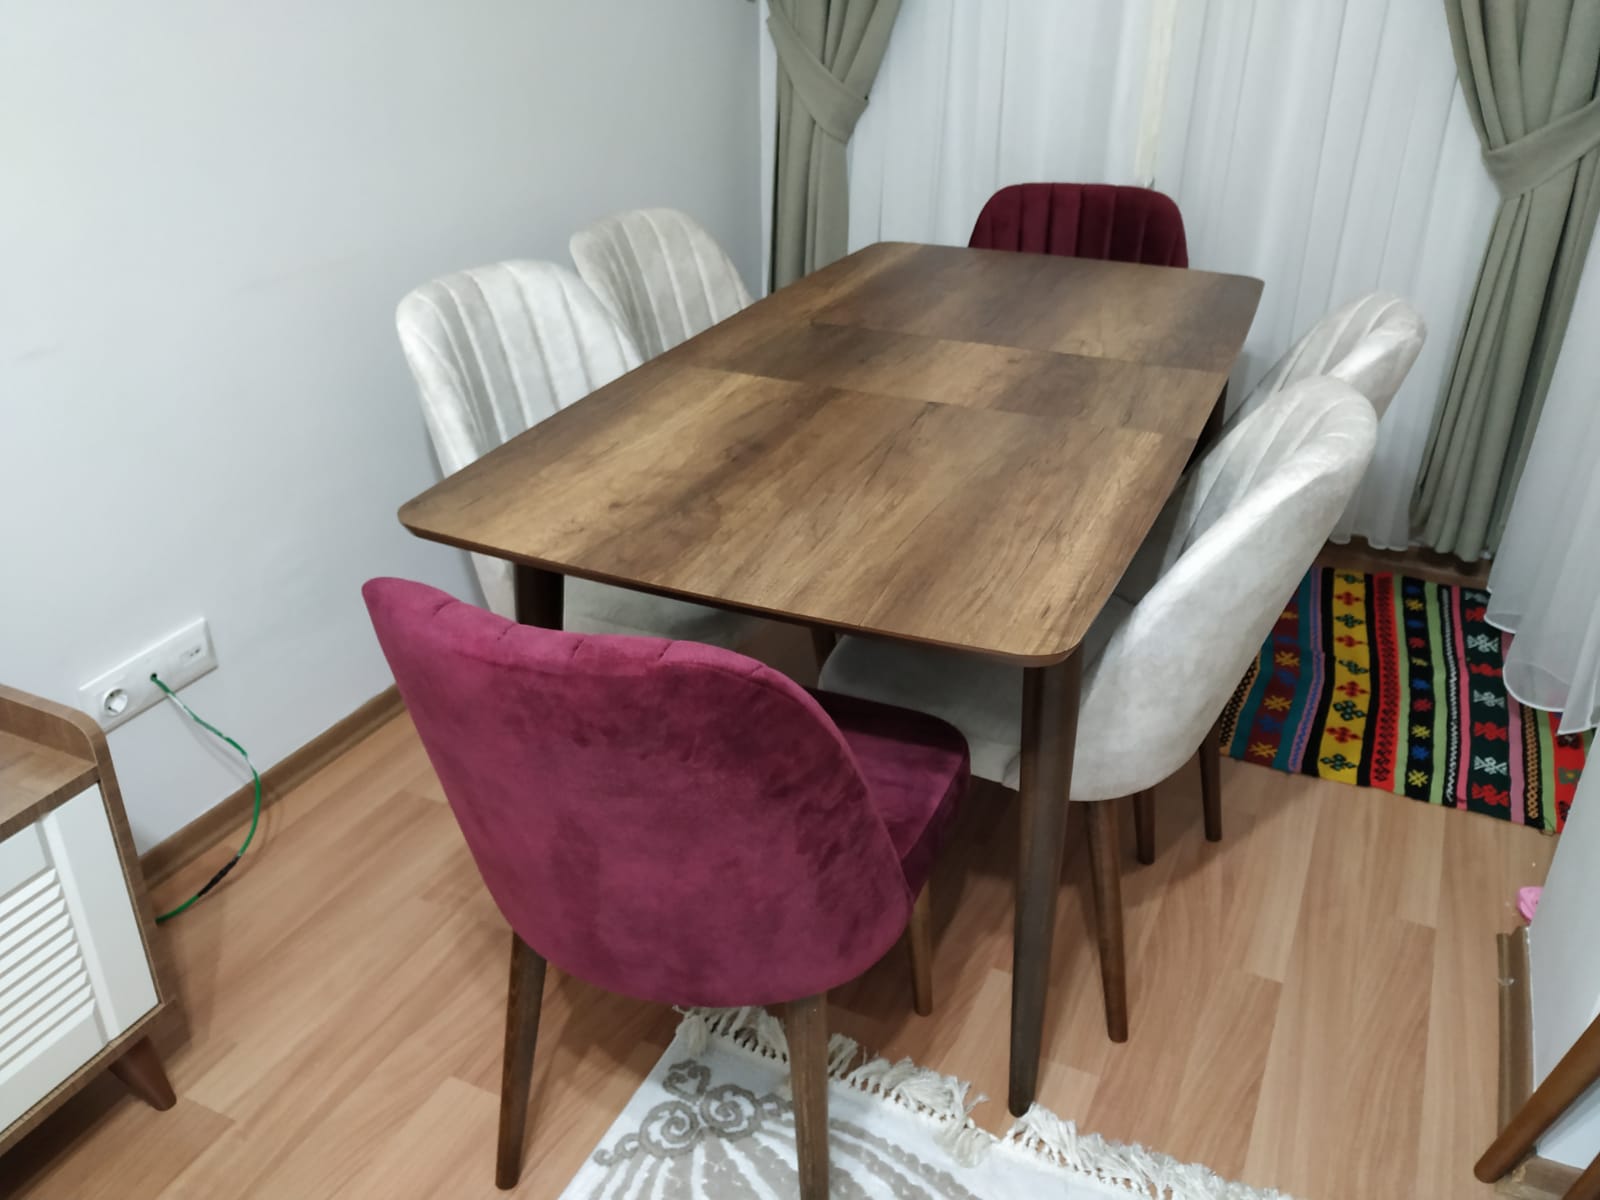 Milano Mdf Table 130x80 cm and Retro Chair